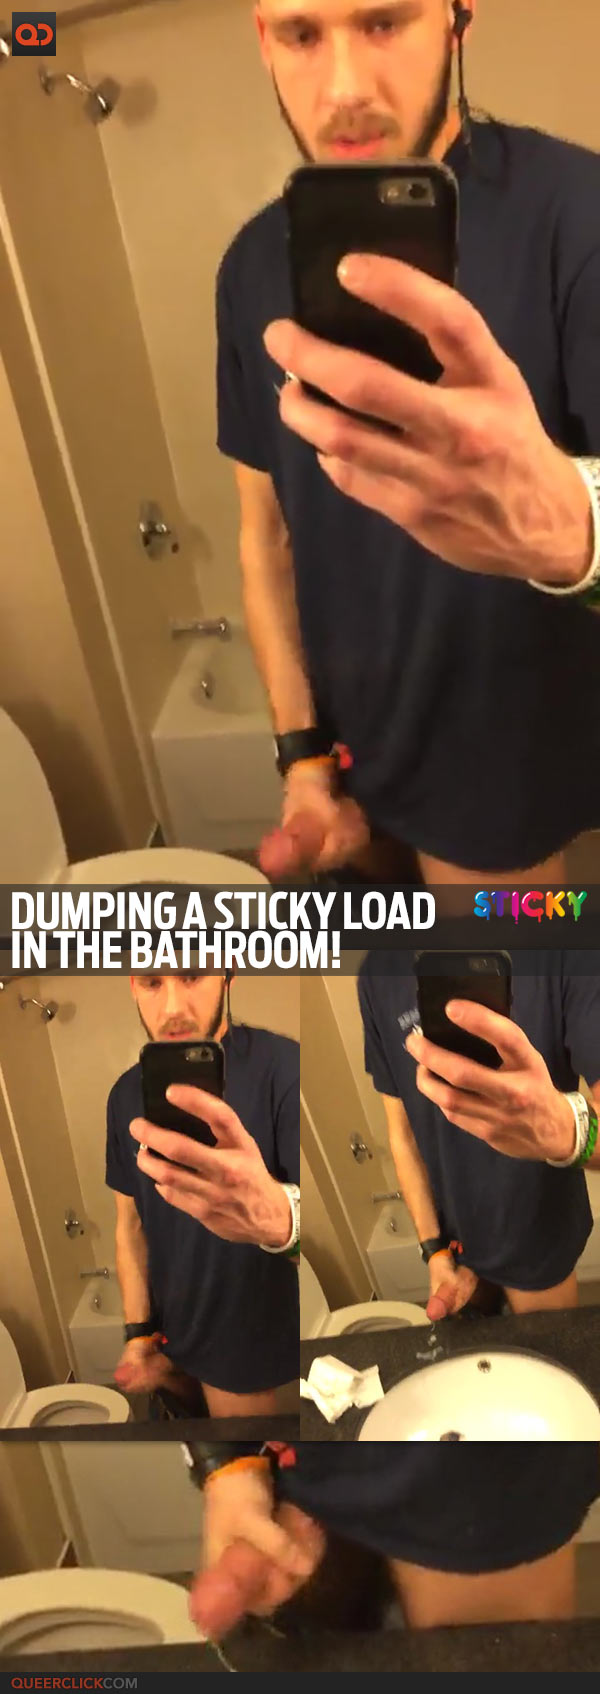 qc-sticky-dumping_a_load-teaser